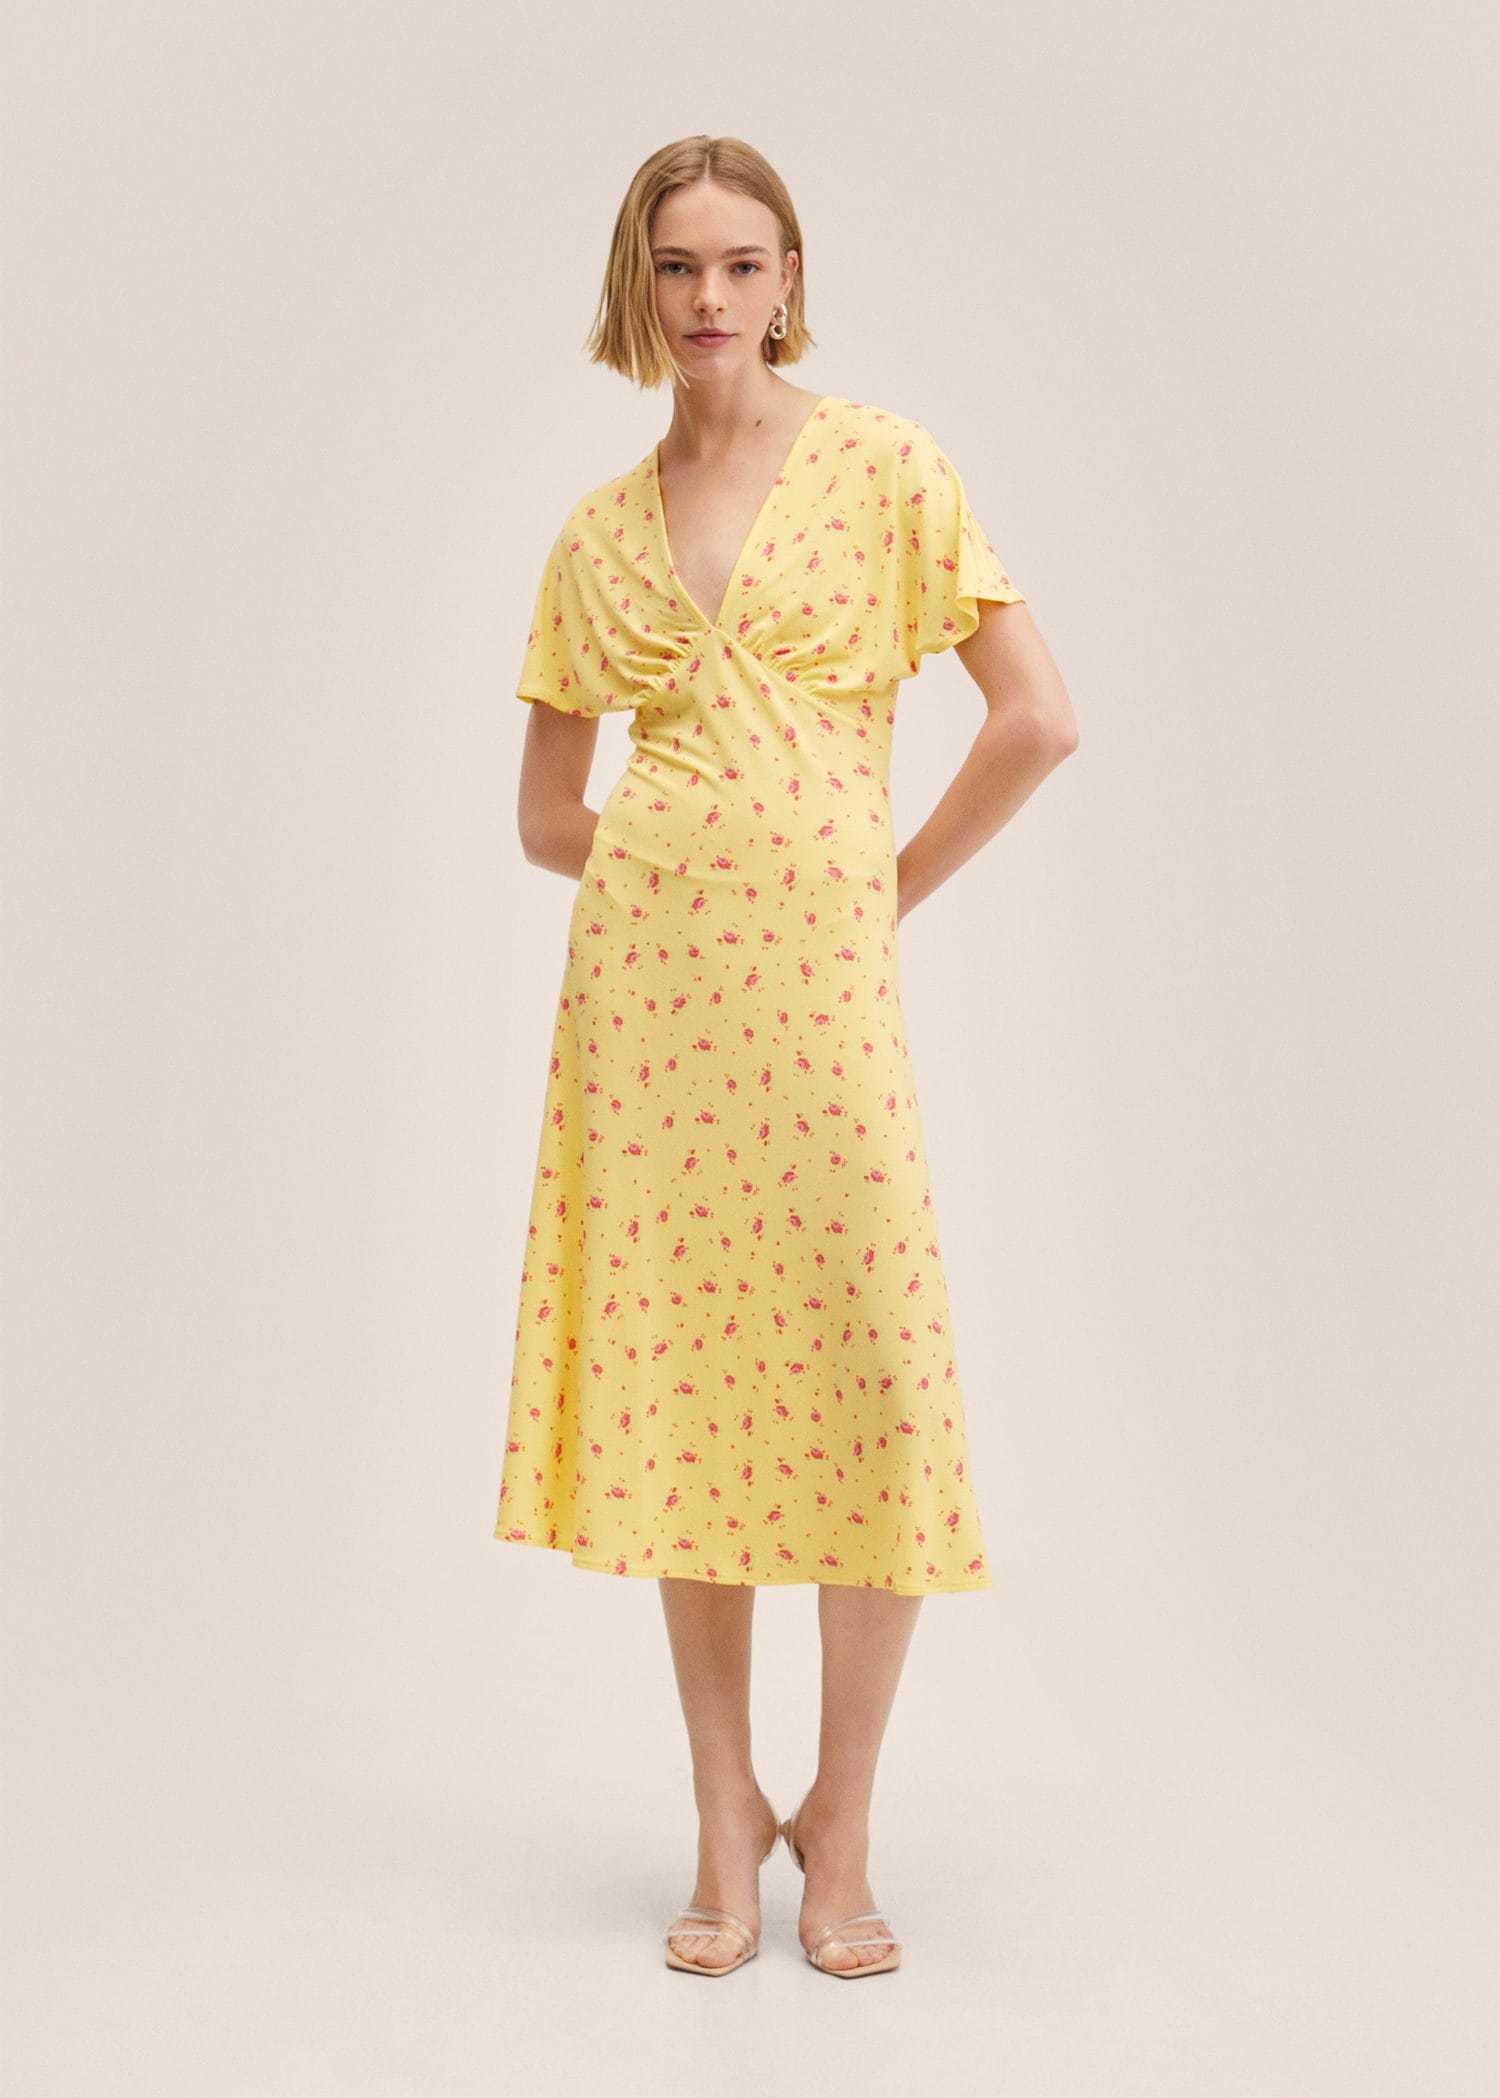 Yellow dress with flowers, by Mango.